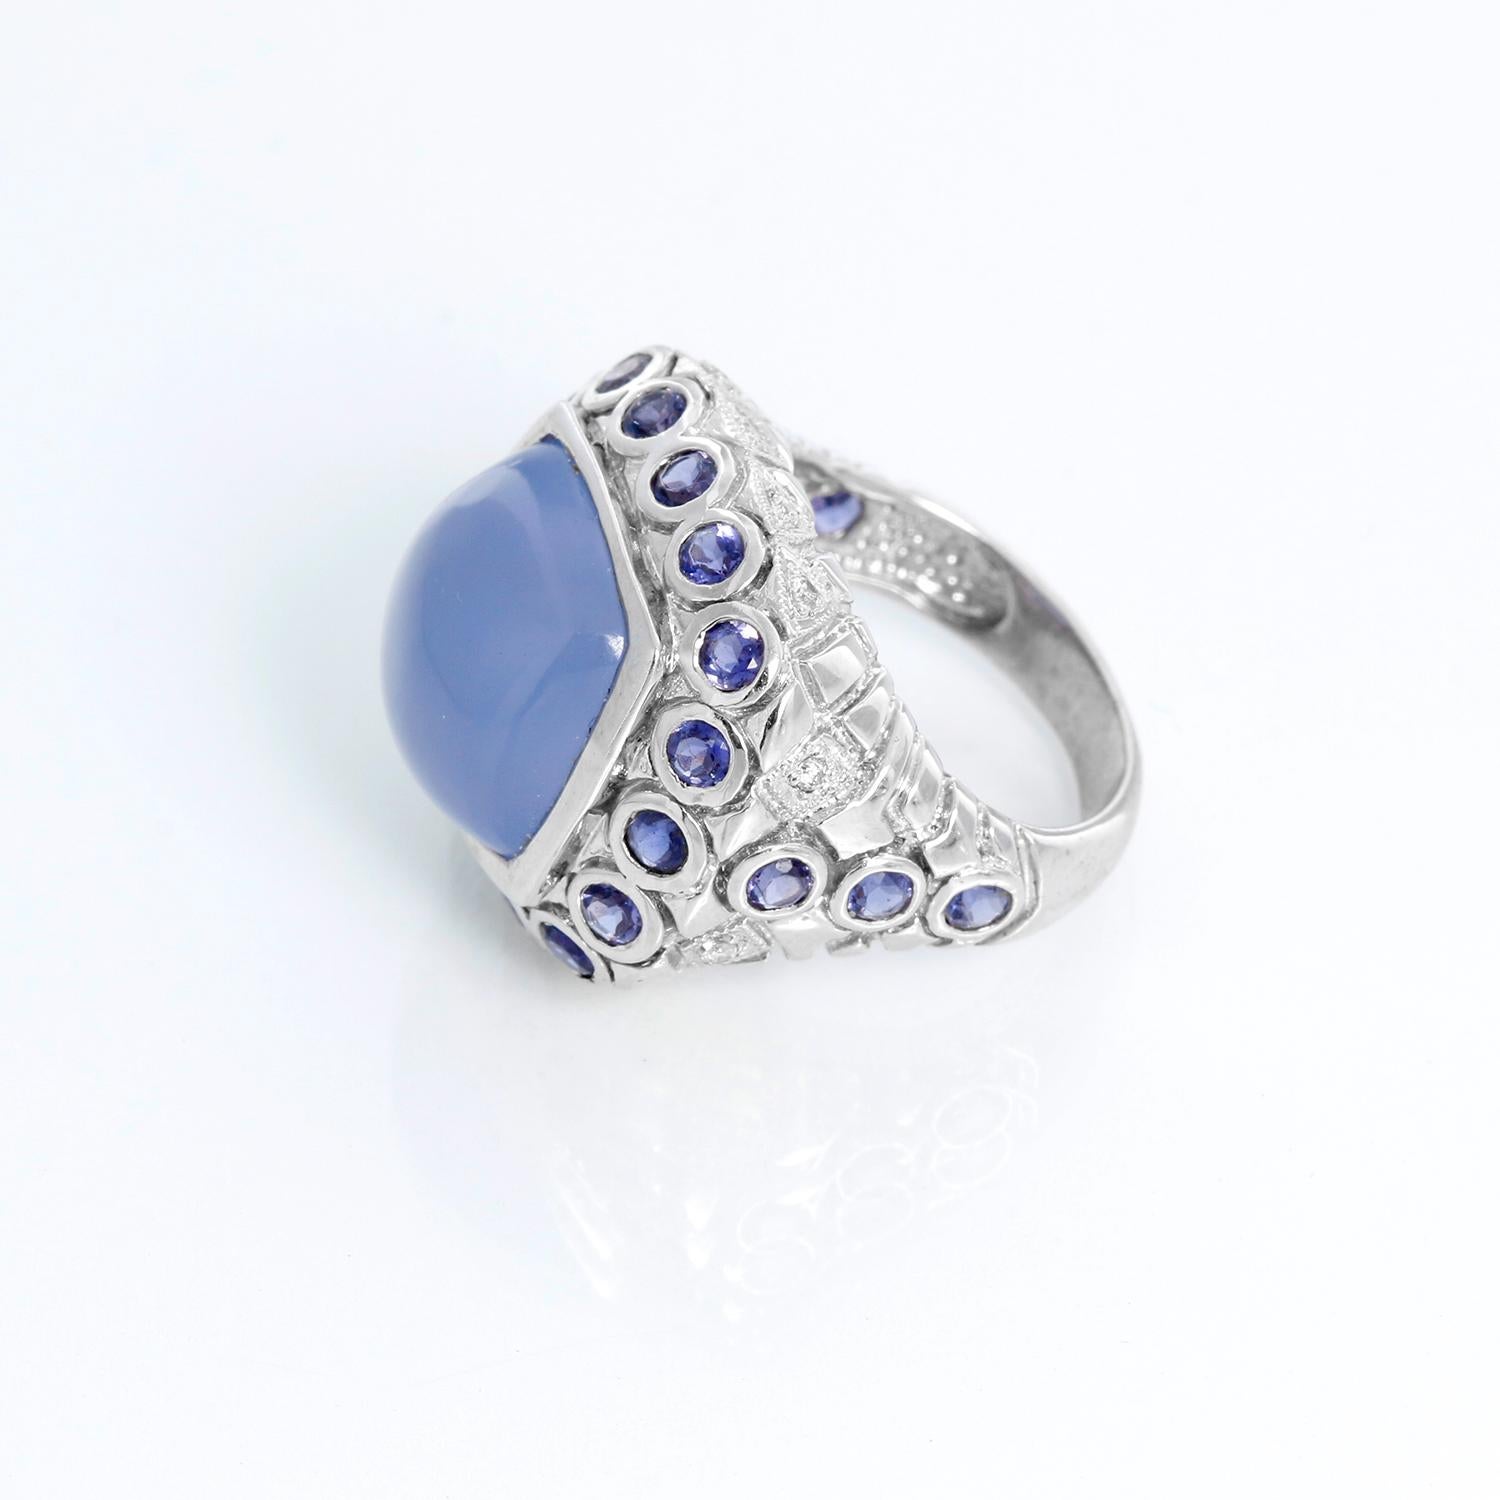 Moon Stone & Sapphire Ring Size 5 - White gold ring with a cabochon Moon stone surround by Sapphires and diamonds. Size 5. This is the perfect cocktail ring .